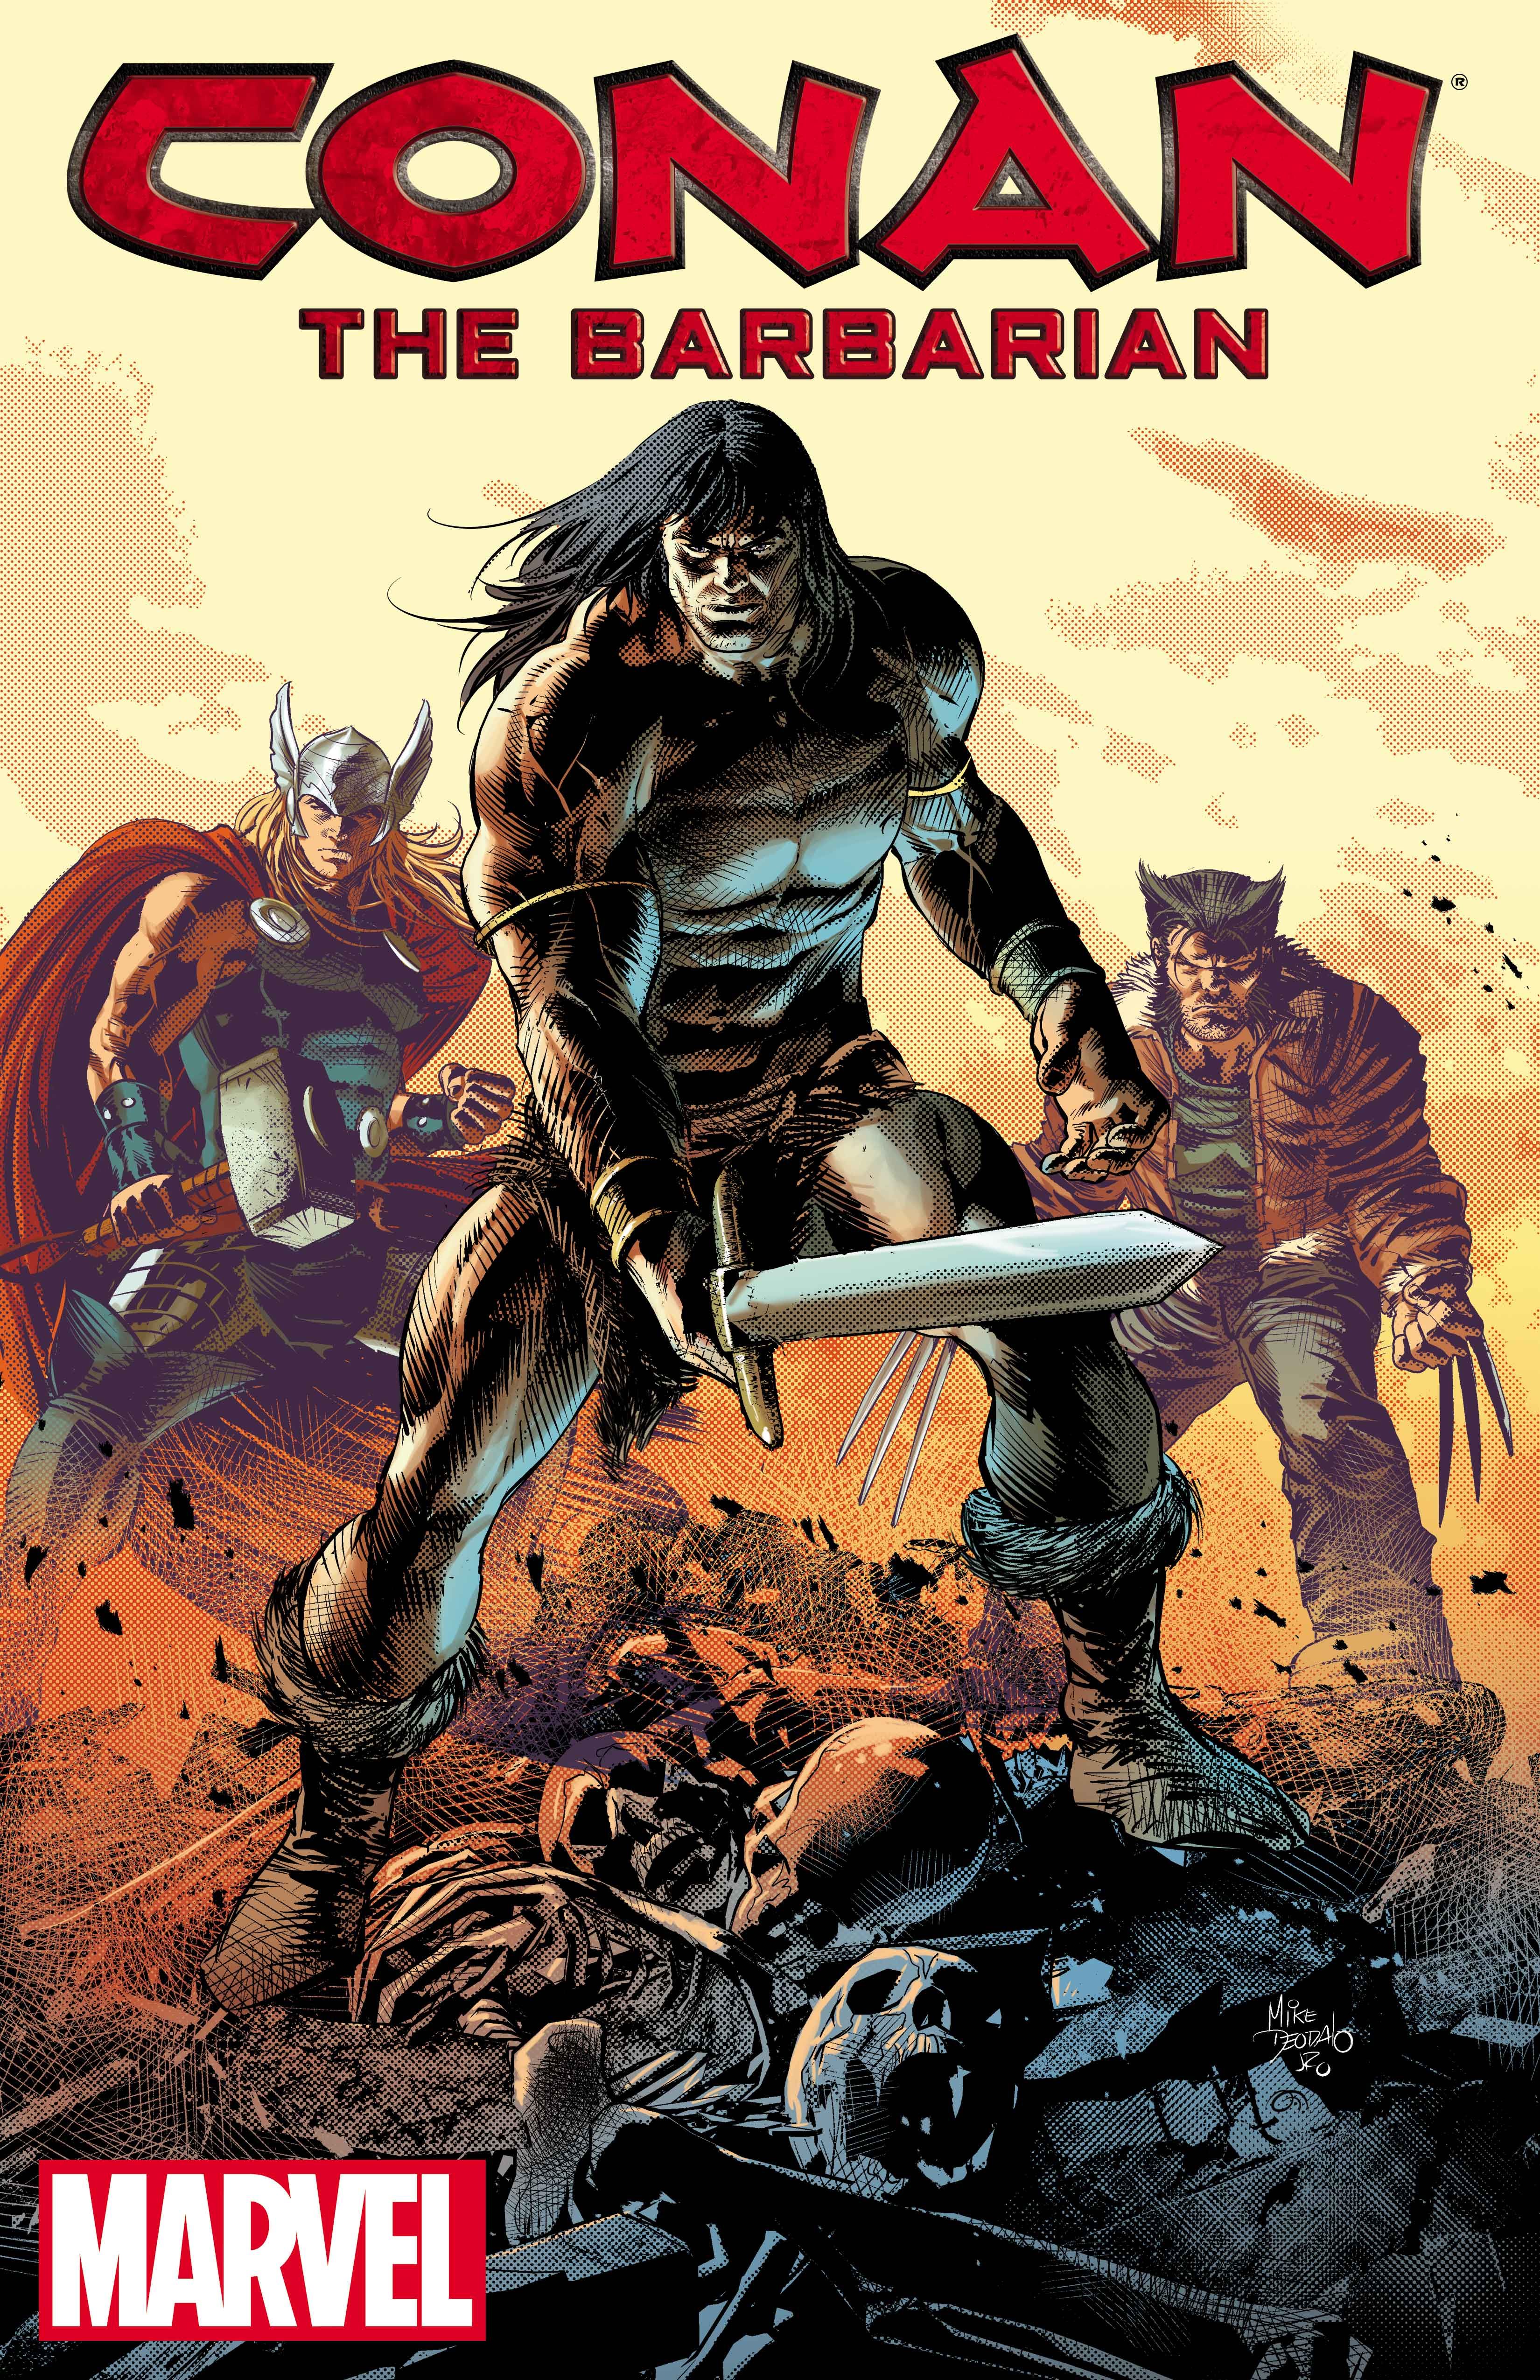 Conan the Barbarian art by Mike Deodato